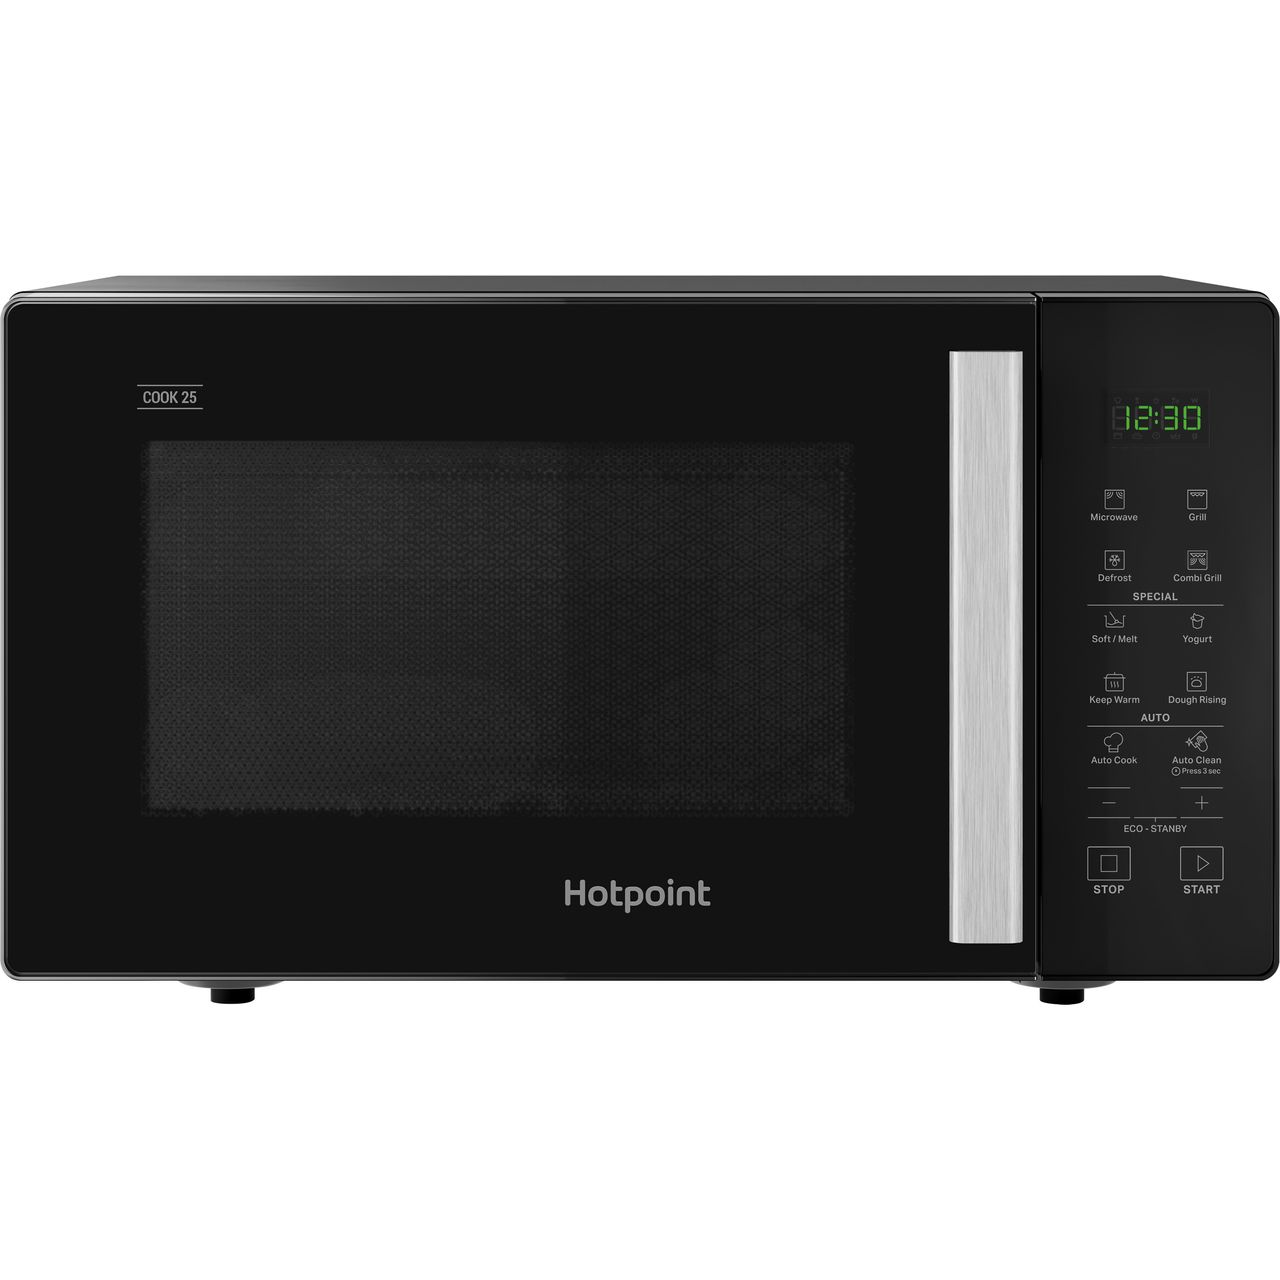 Hotpoint COOK 25 MWH253B 25 Litre Microwave With Grill Review